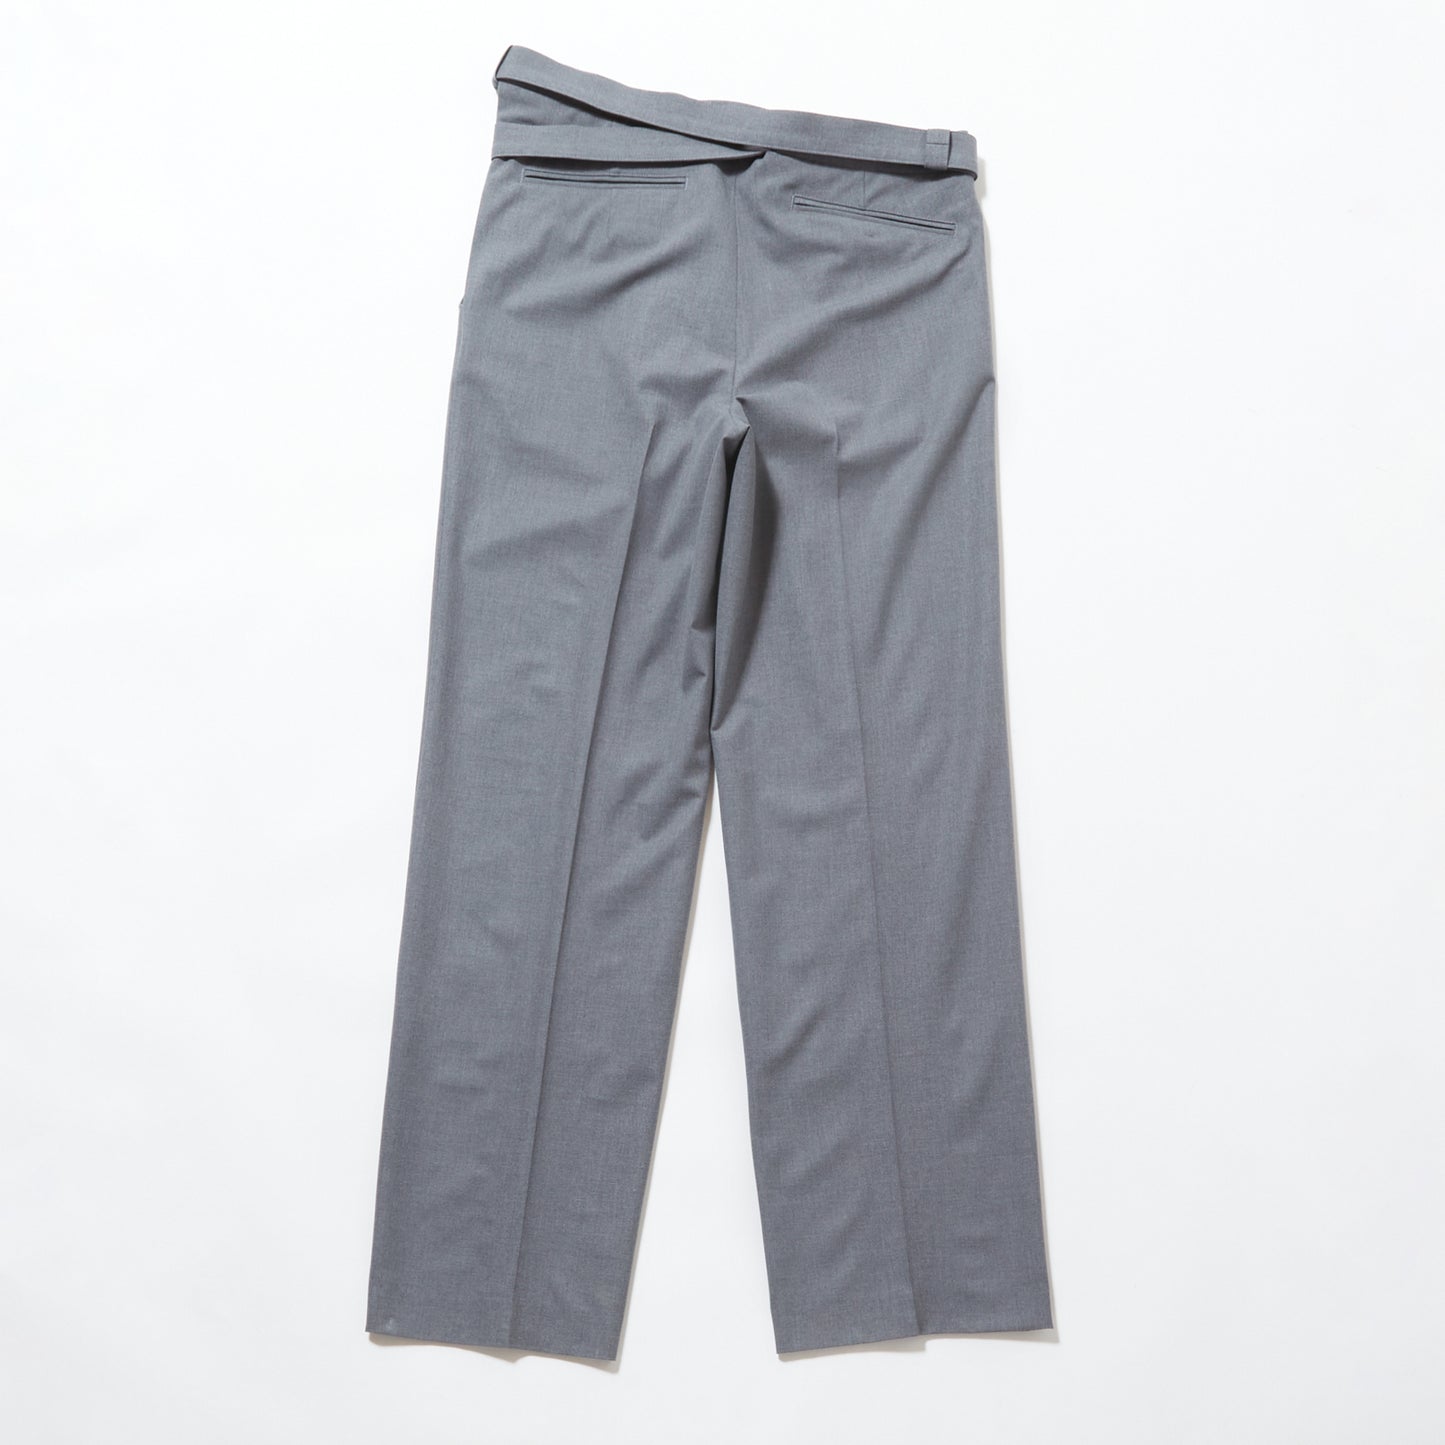 three belted pants【Delivery in January 2023】